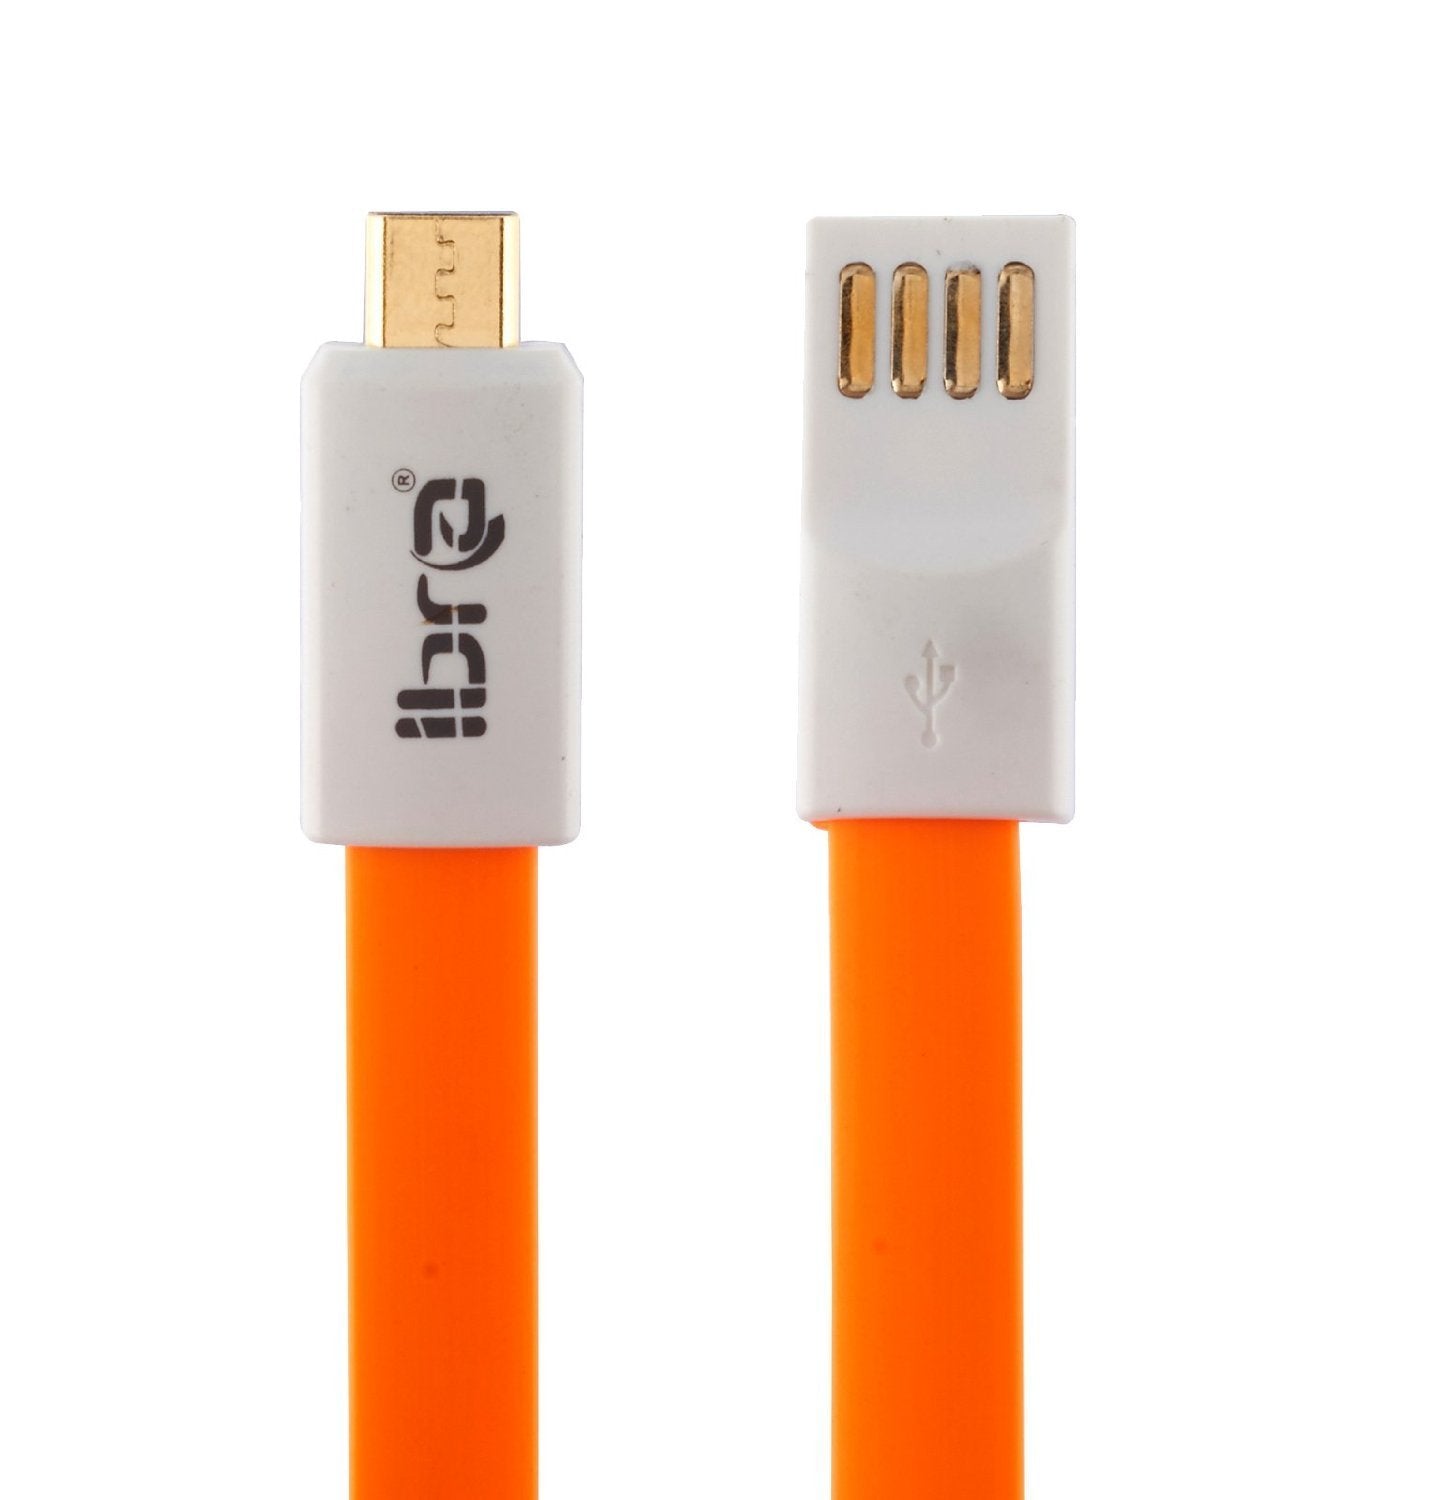 IBRA 0.2M Magnet Short and Compact Micro USB Charging/Sync Data Cable for for Samsung Galaxy S4 i9500 i9300 N7100 Nokia HTC Sony Xperia Series and all Mobilephones/Tablets/Cameras/Sat Nav -7.5Inch - Orange